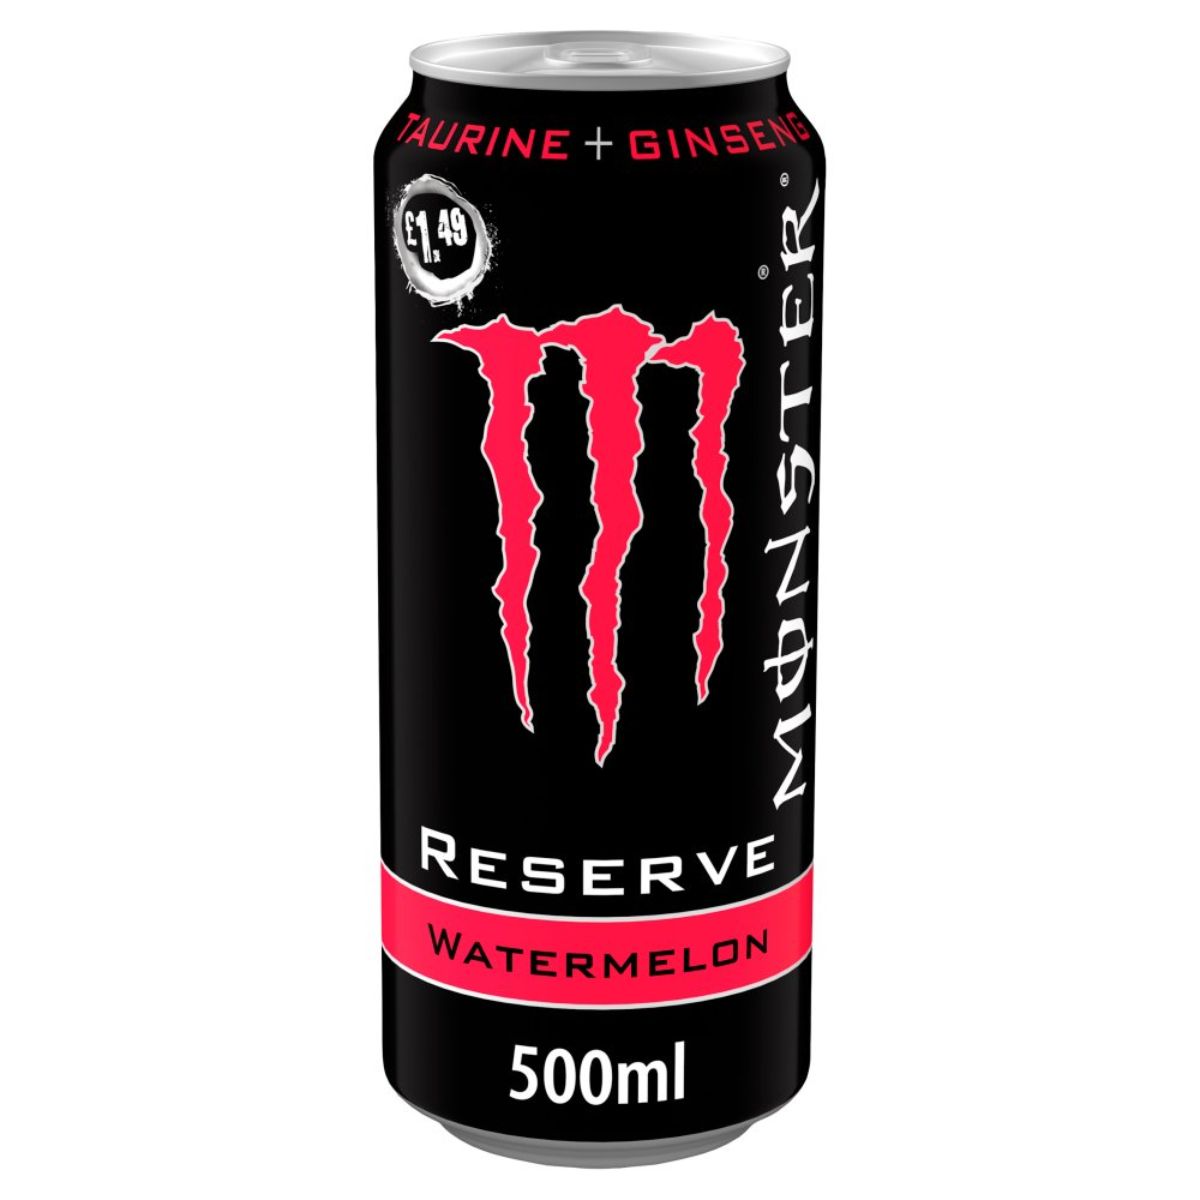 Monster - Reserve Watermelon - 500ml is the product.